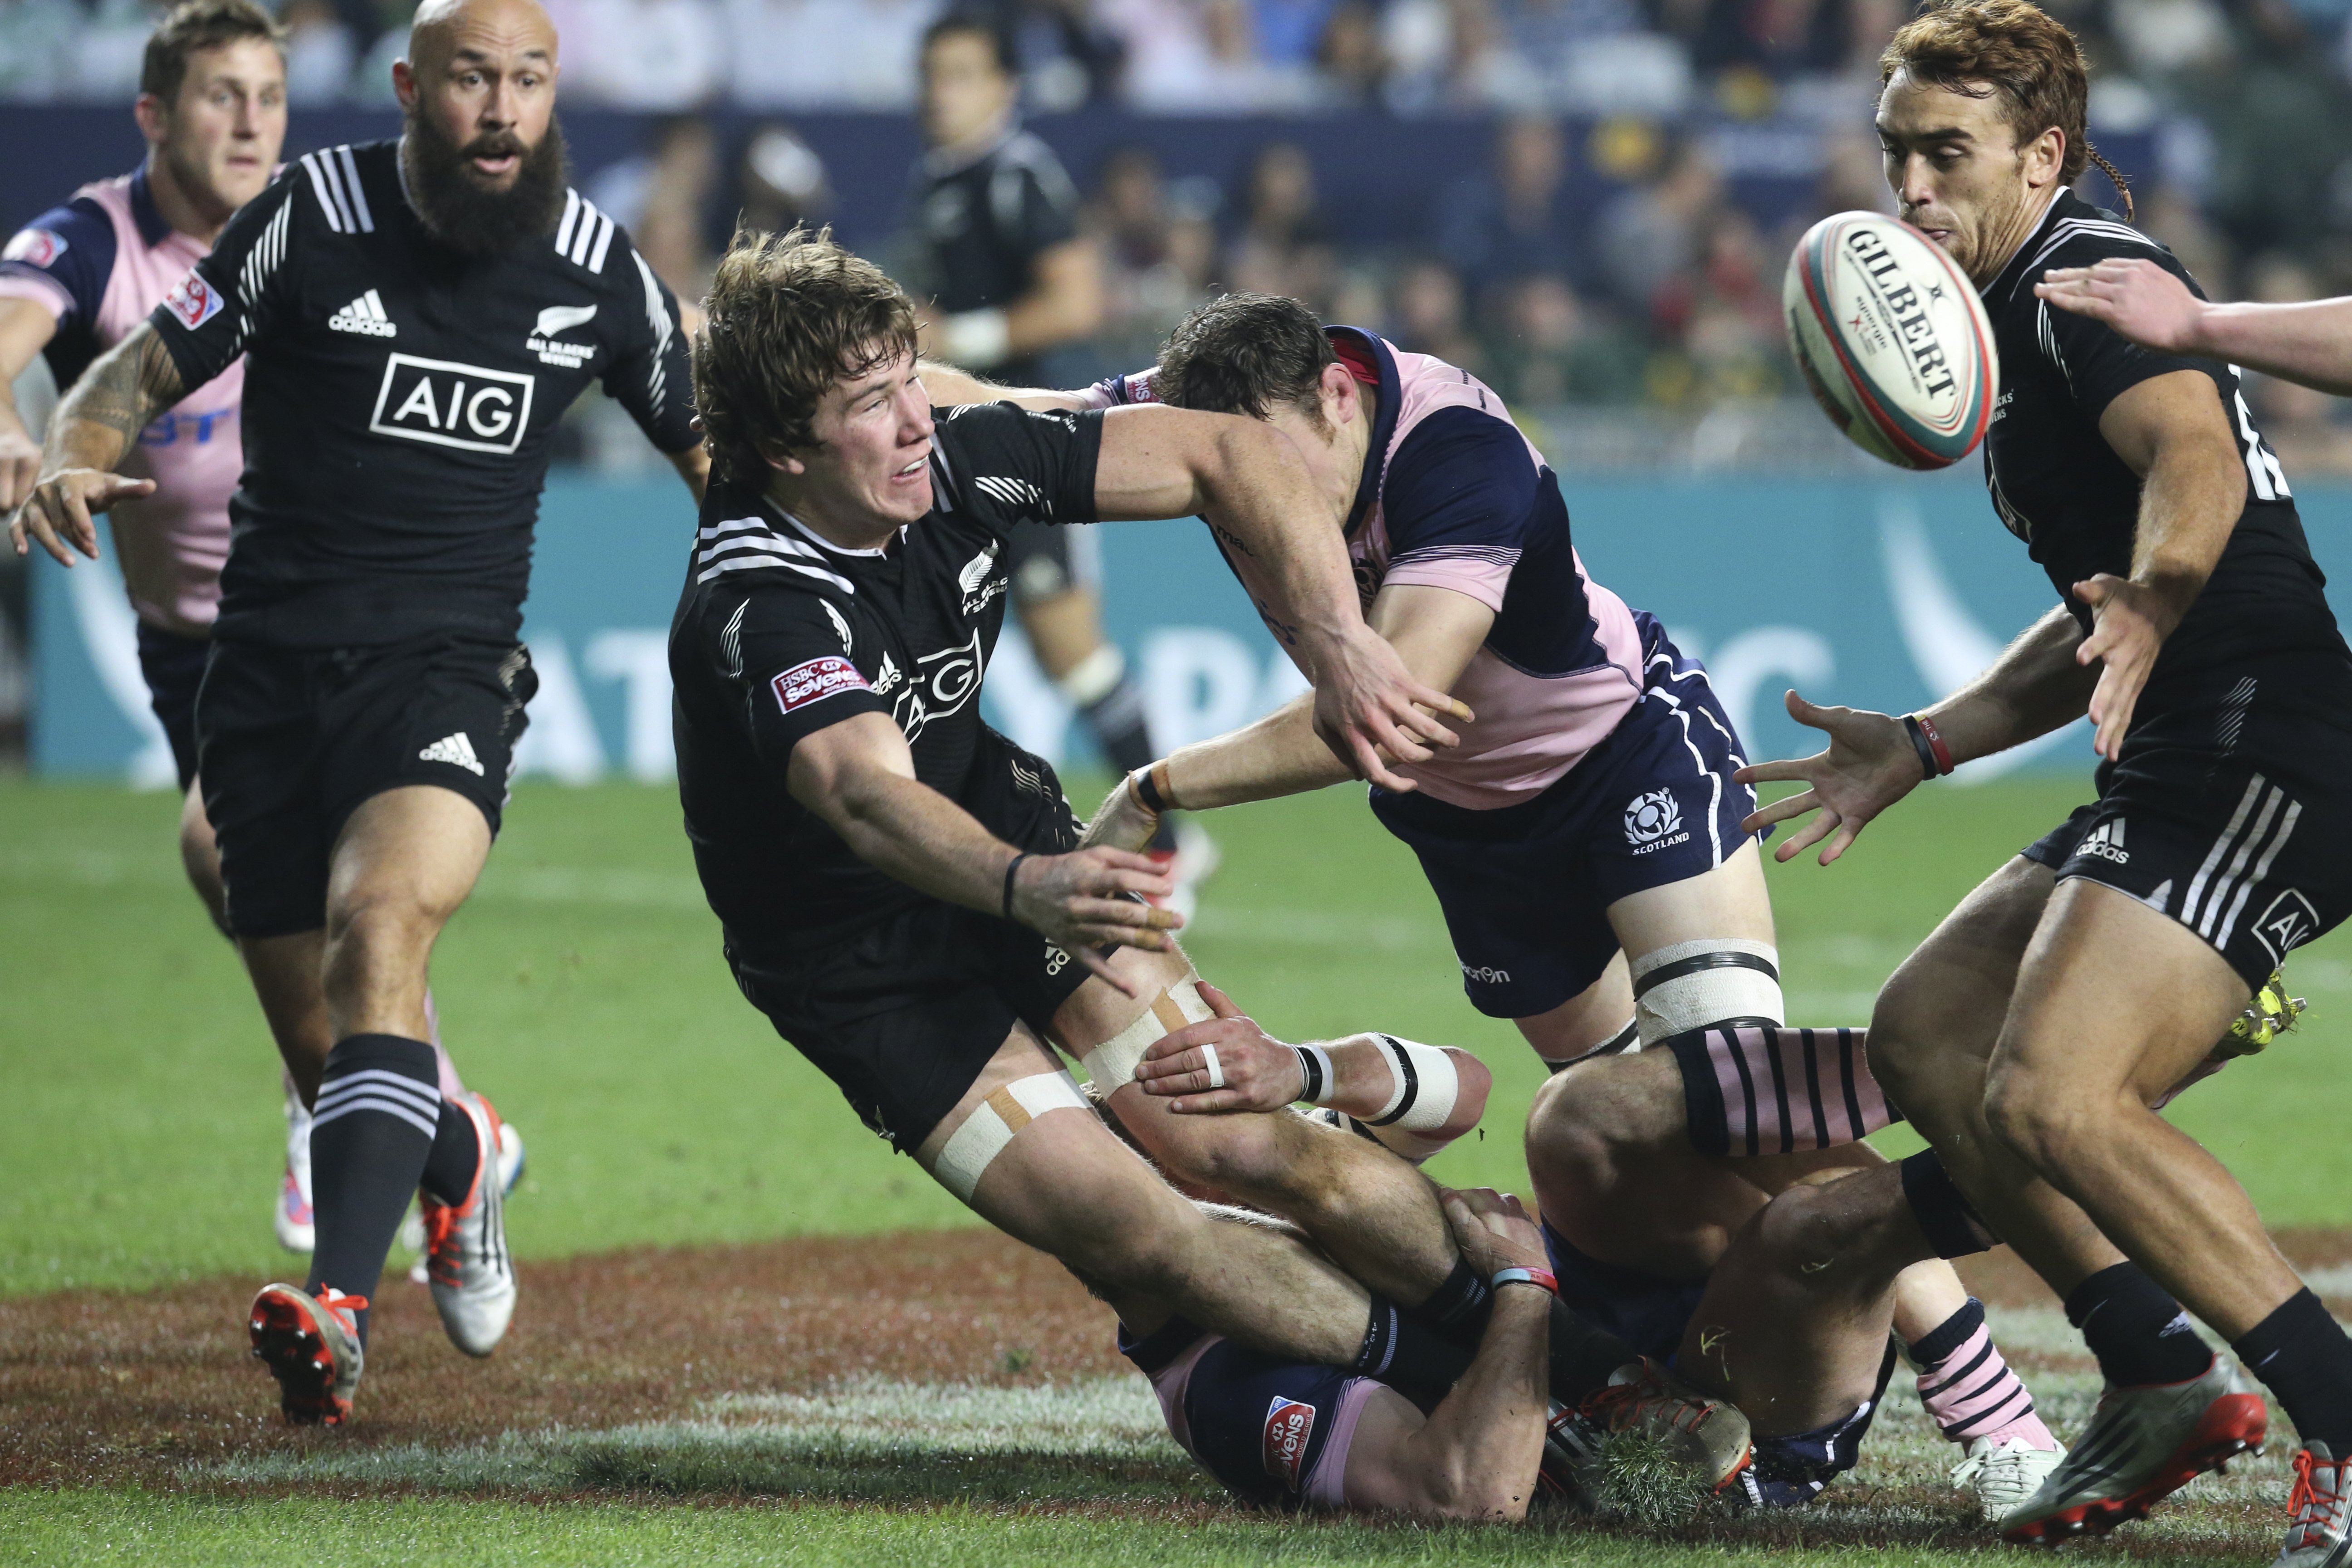 New Zealand captain DJ Forbes (far left) moves in to direct play as Sam Dickson offloads against Scotland. The All Blacks Sevens won their opening match 26-7 on Friday night at the Hong Kong Sevens. Photos: KY Cheng/SCMP